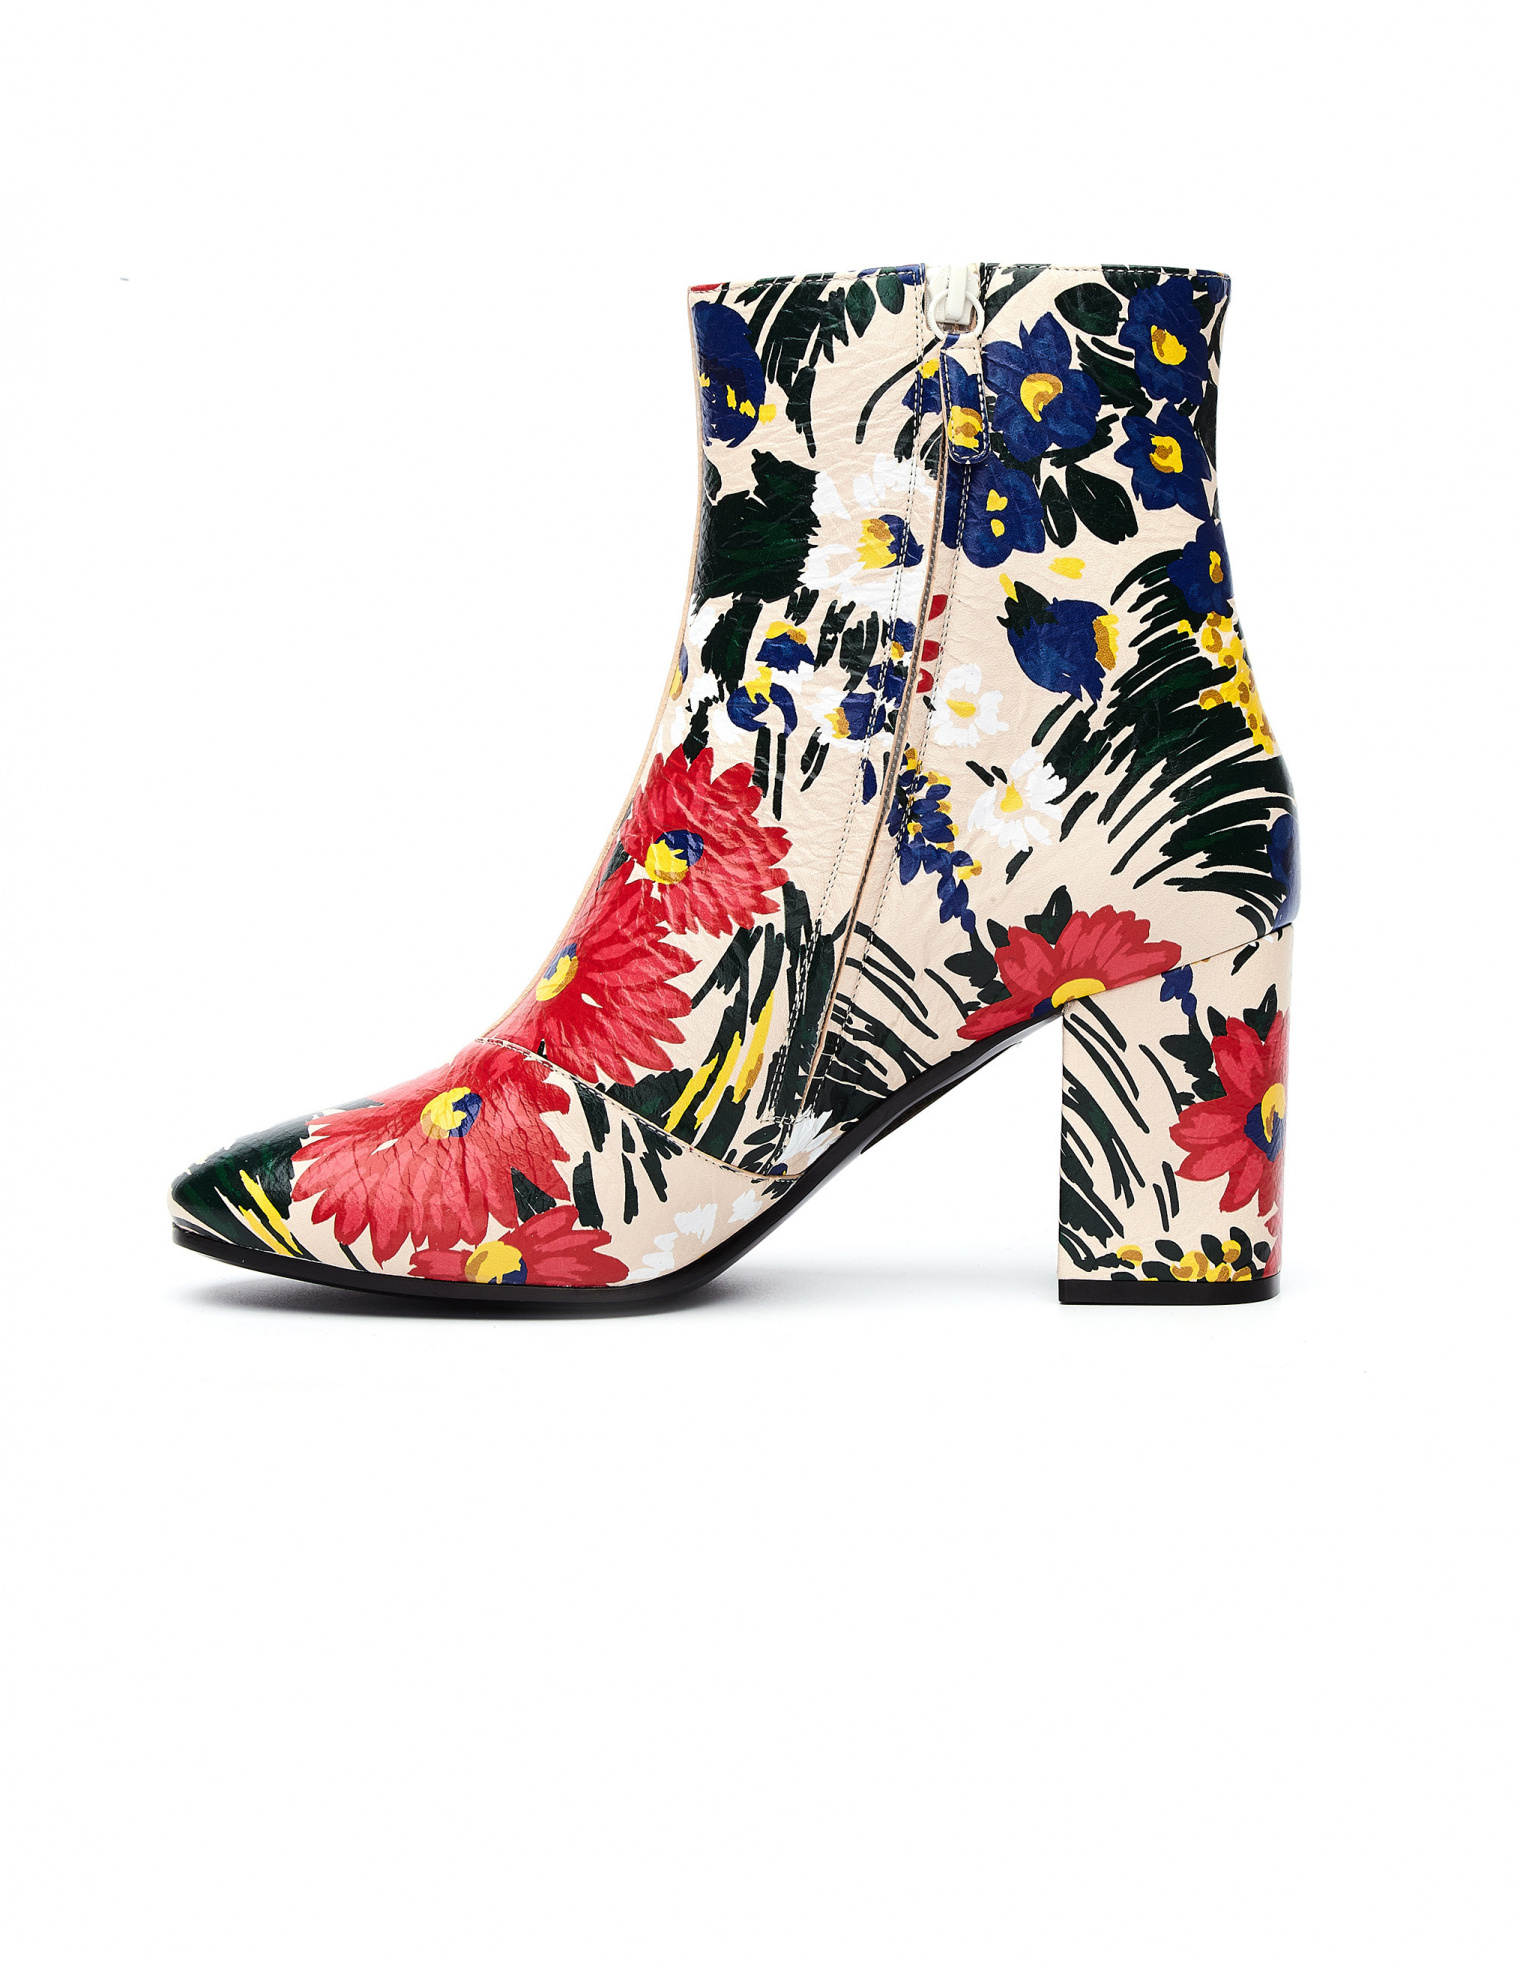 Balenciaga Flower Printed Leather Ville Boots